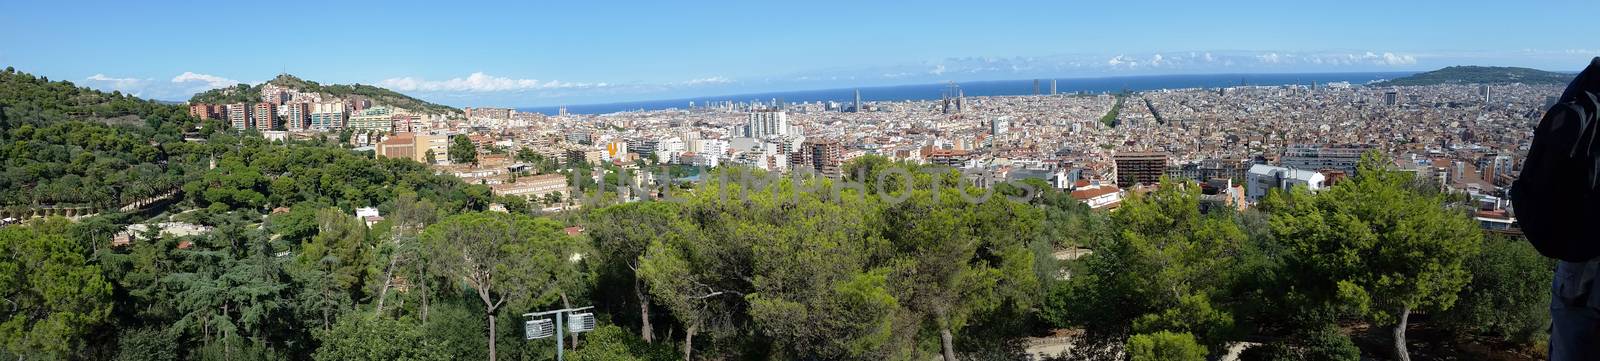 Panoramic view of Barcelona (Spain) from Park Guell